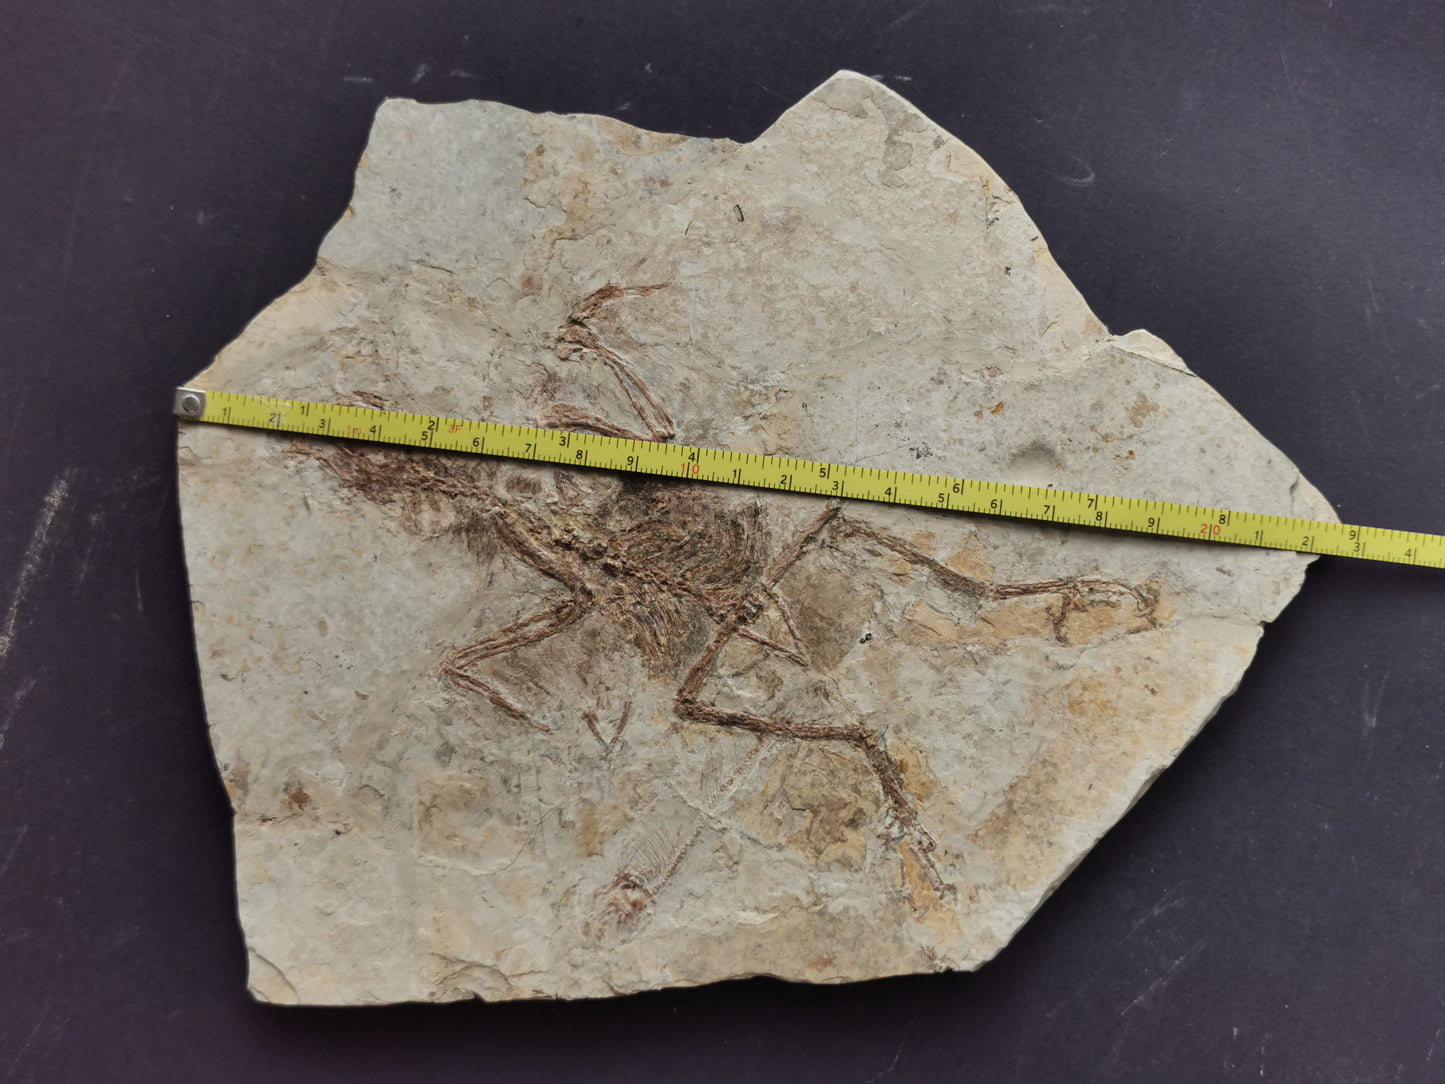 Complete Bird skeleton Fossil from lower Cretaceous